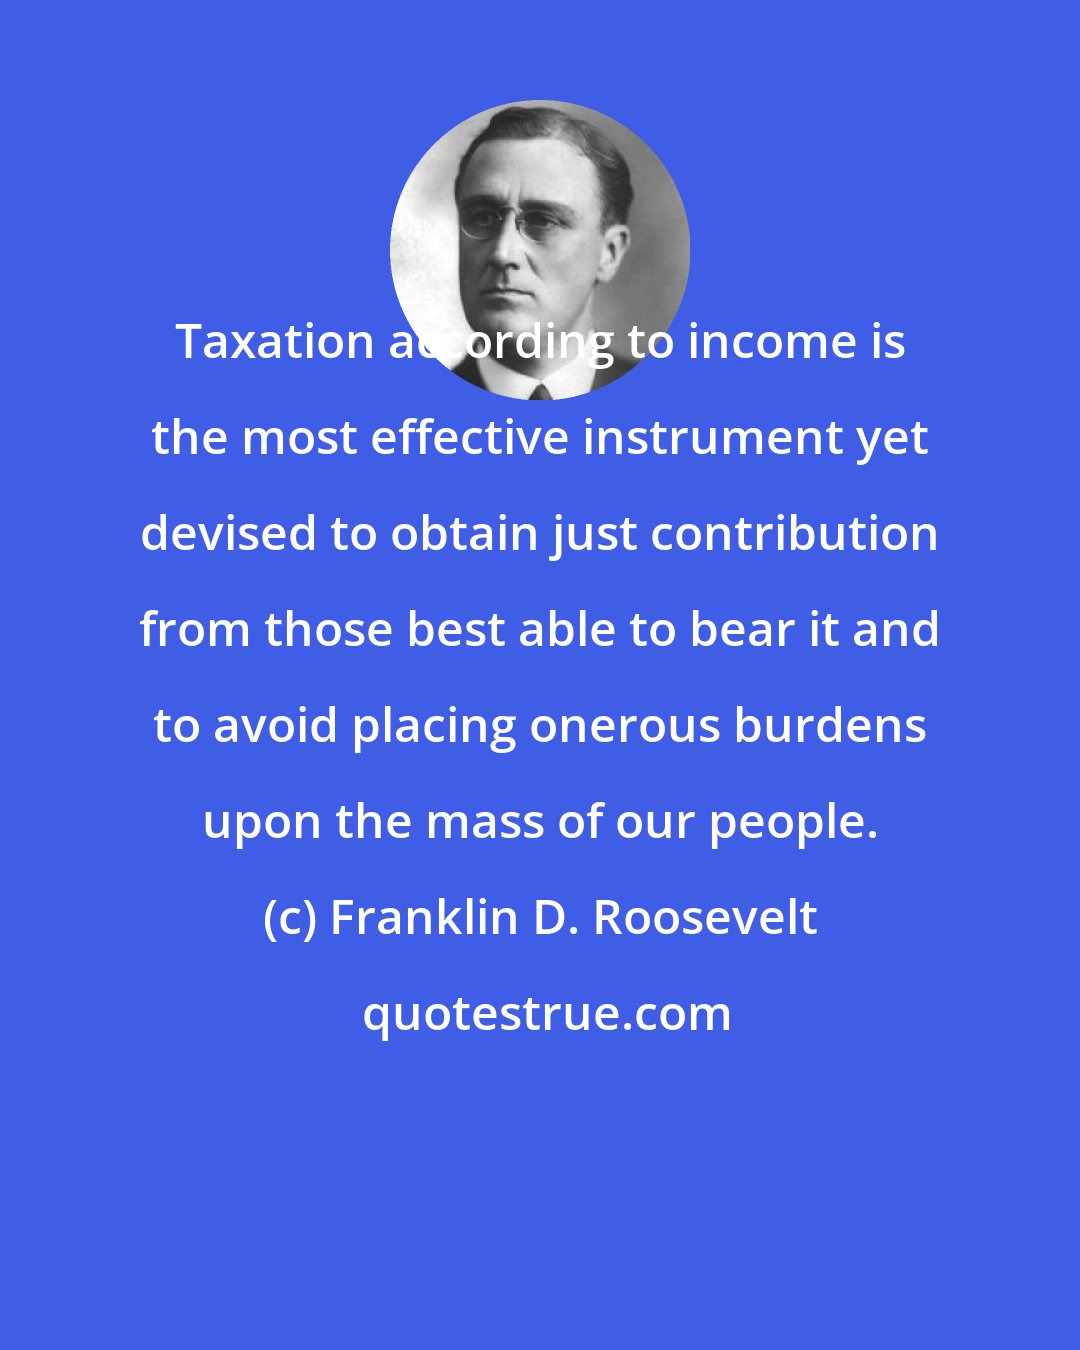 Franklin D. Roosevelt: Taxation according to income is the most effective instrument yet devised to obtain just contribution from those best able to bear it and to avoid placing onerous burdens upon the mass of our people.